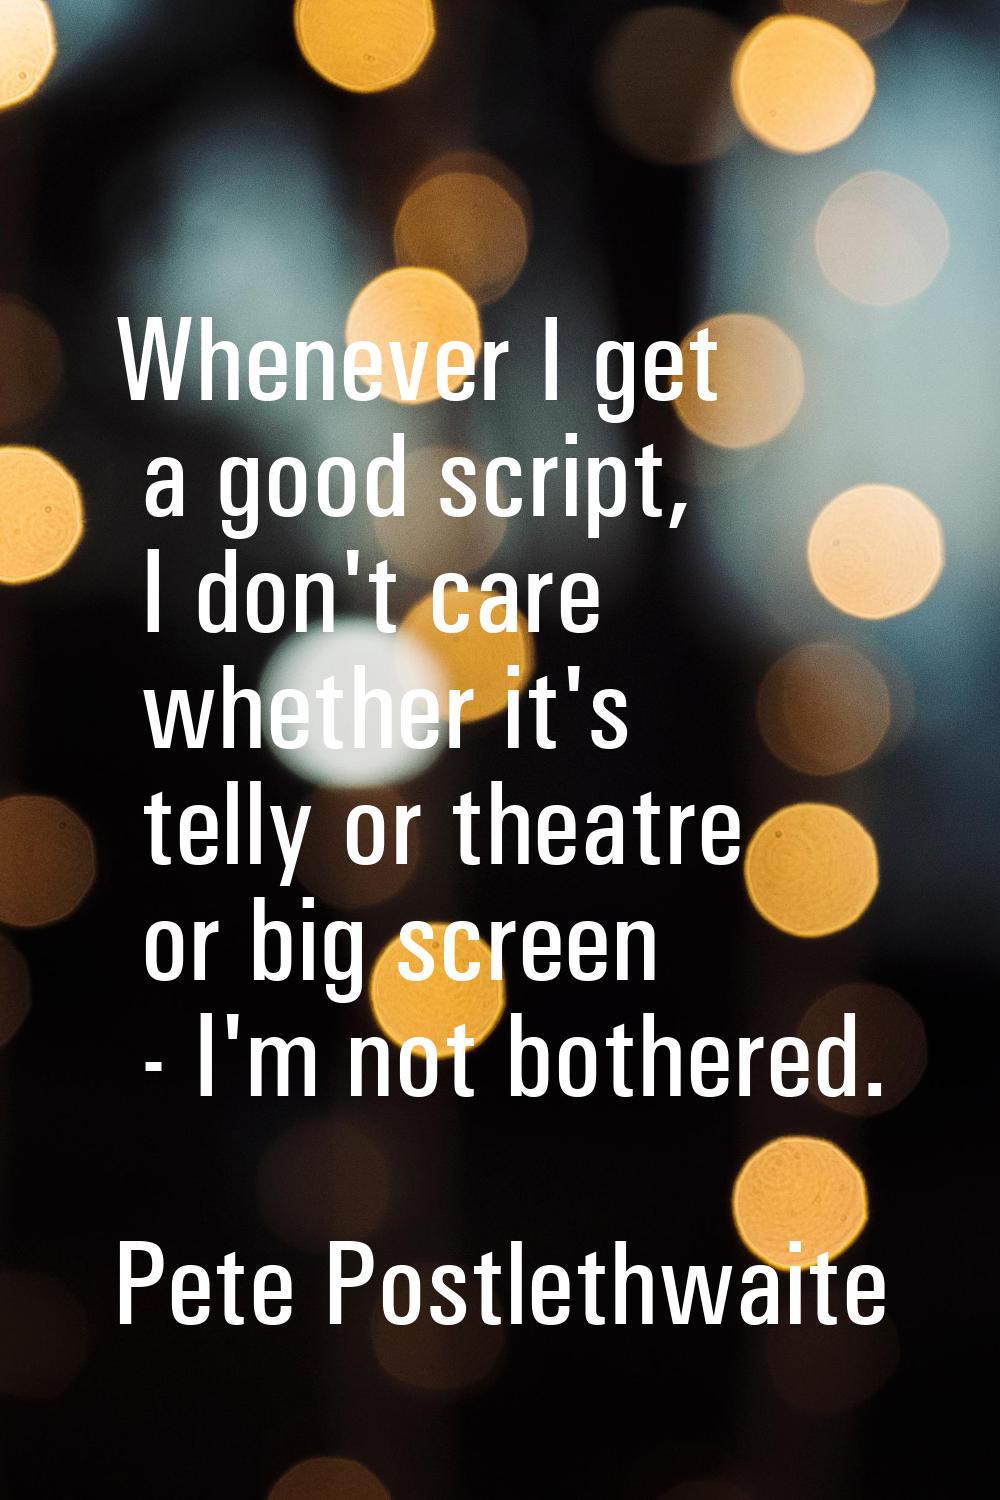 Whenever I get a good script, I don't care whether it's telly or theatre or big screen - I'm not bo